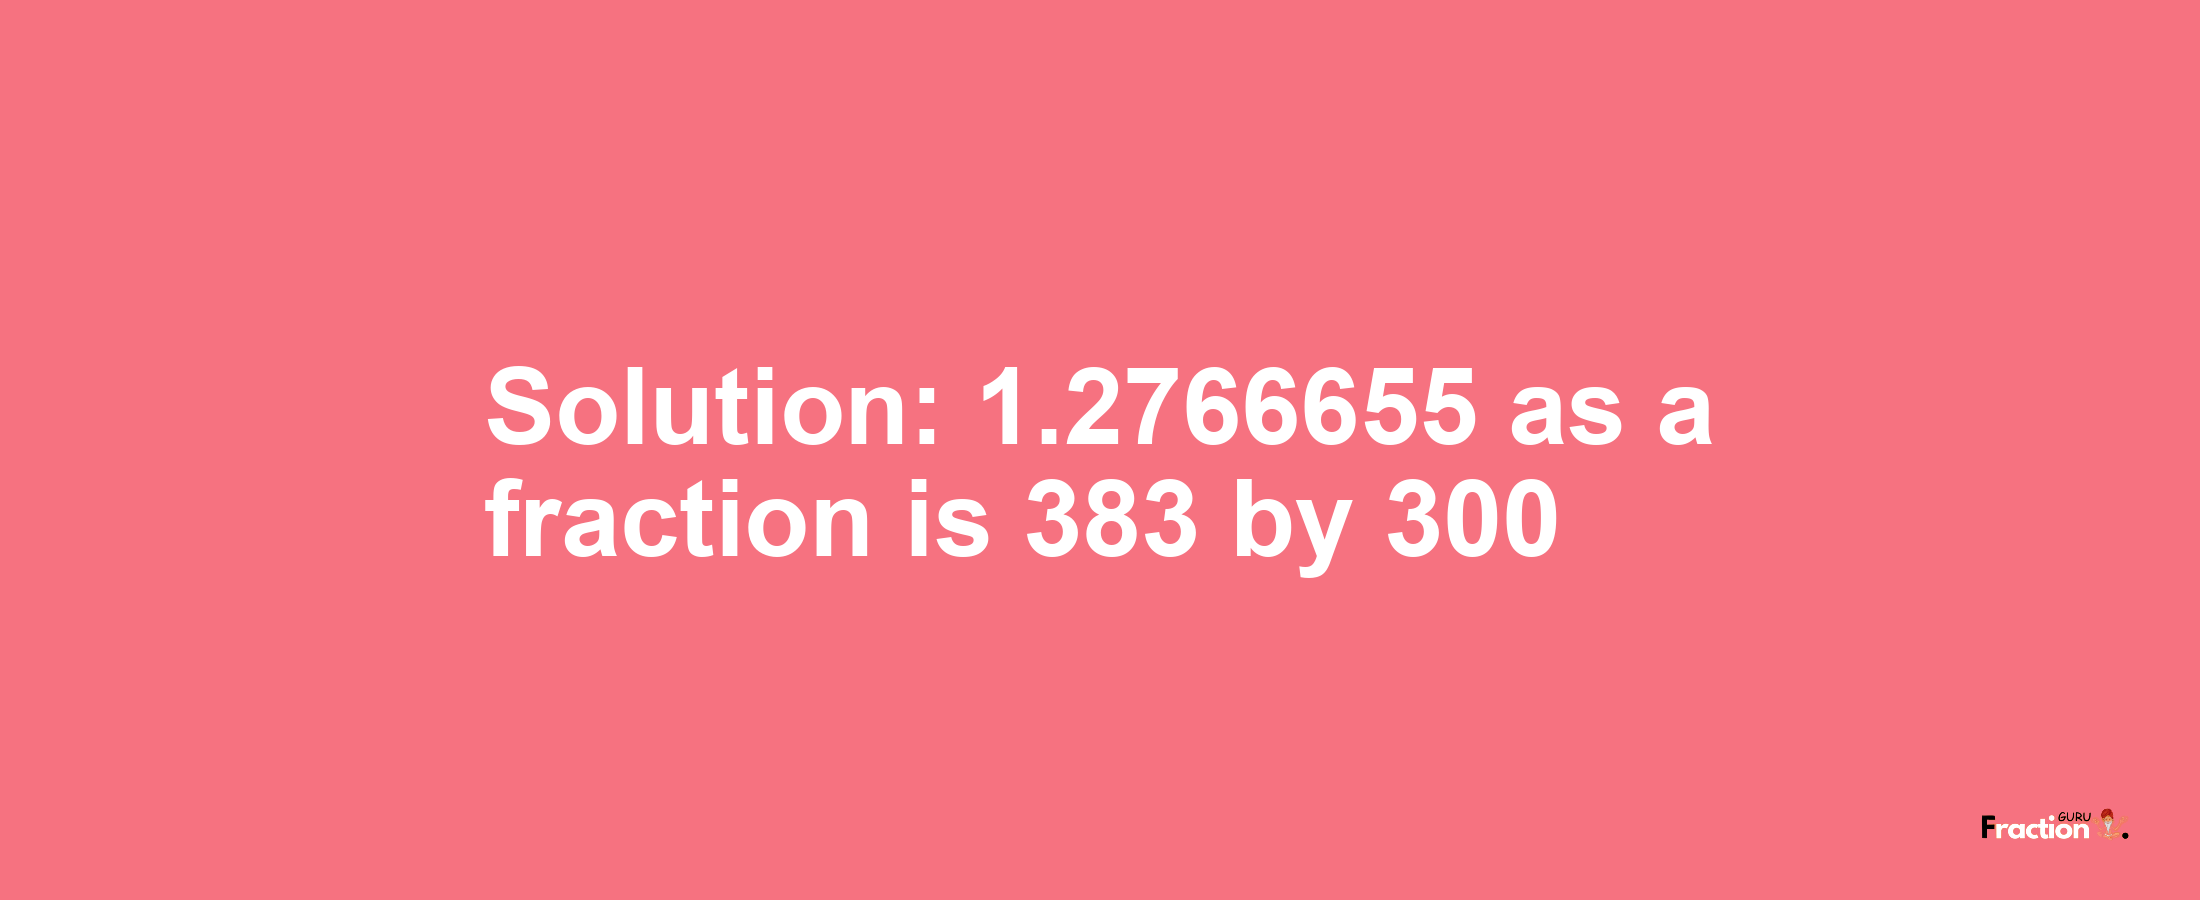 Solution:1.2766655 as a fraction is 383/300